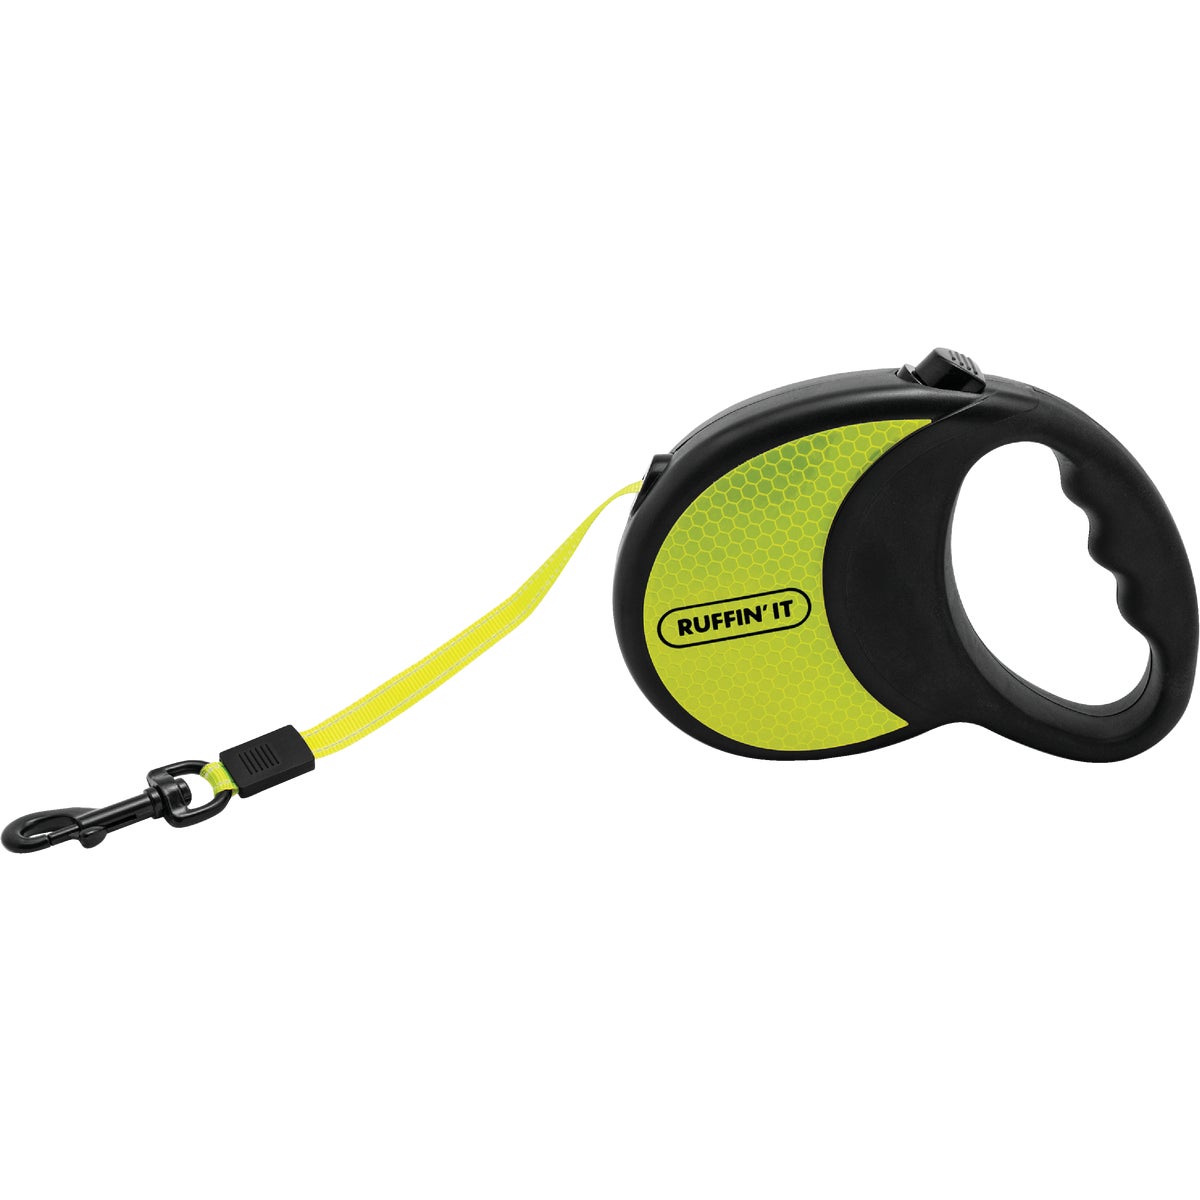 Westminster Pet Ruffin' it 10 Ft. Webbed Reflective Neon Yellow Up to 50 Lb. Dog Retractable Leash